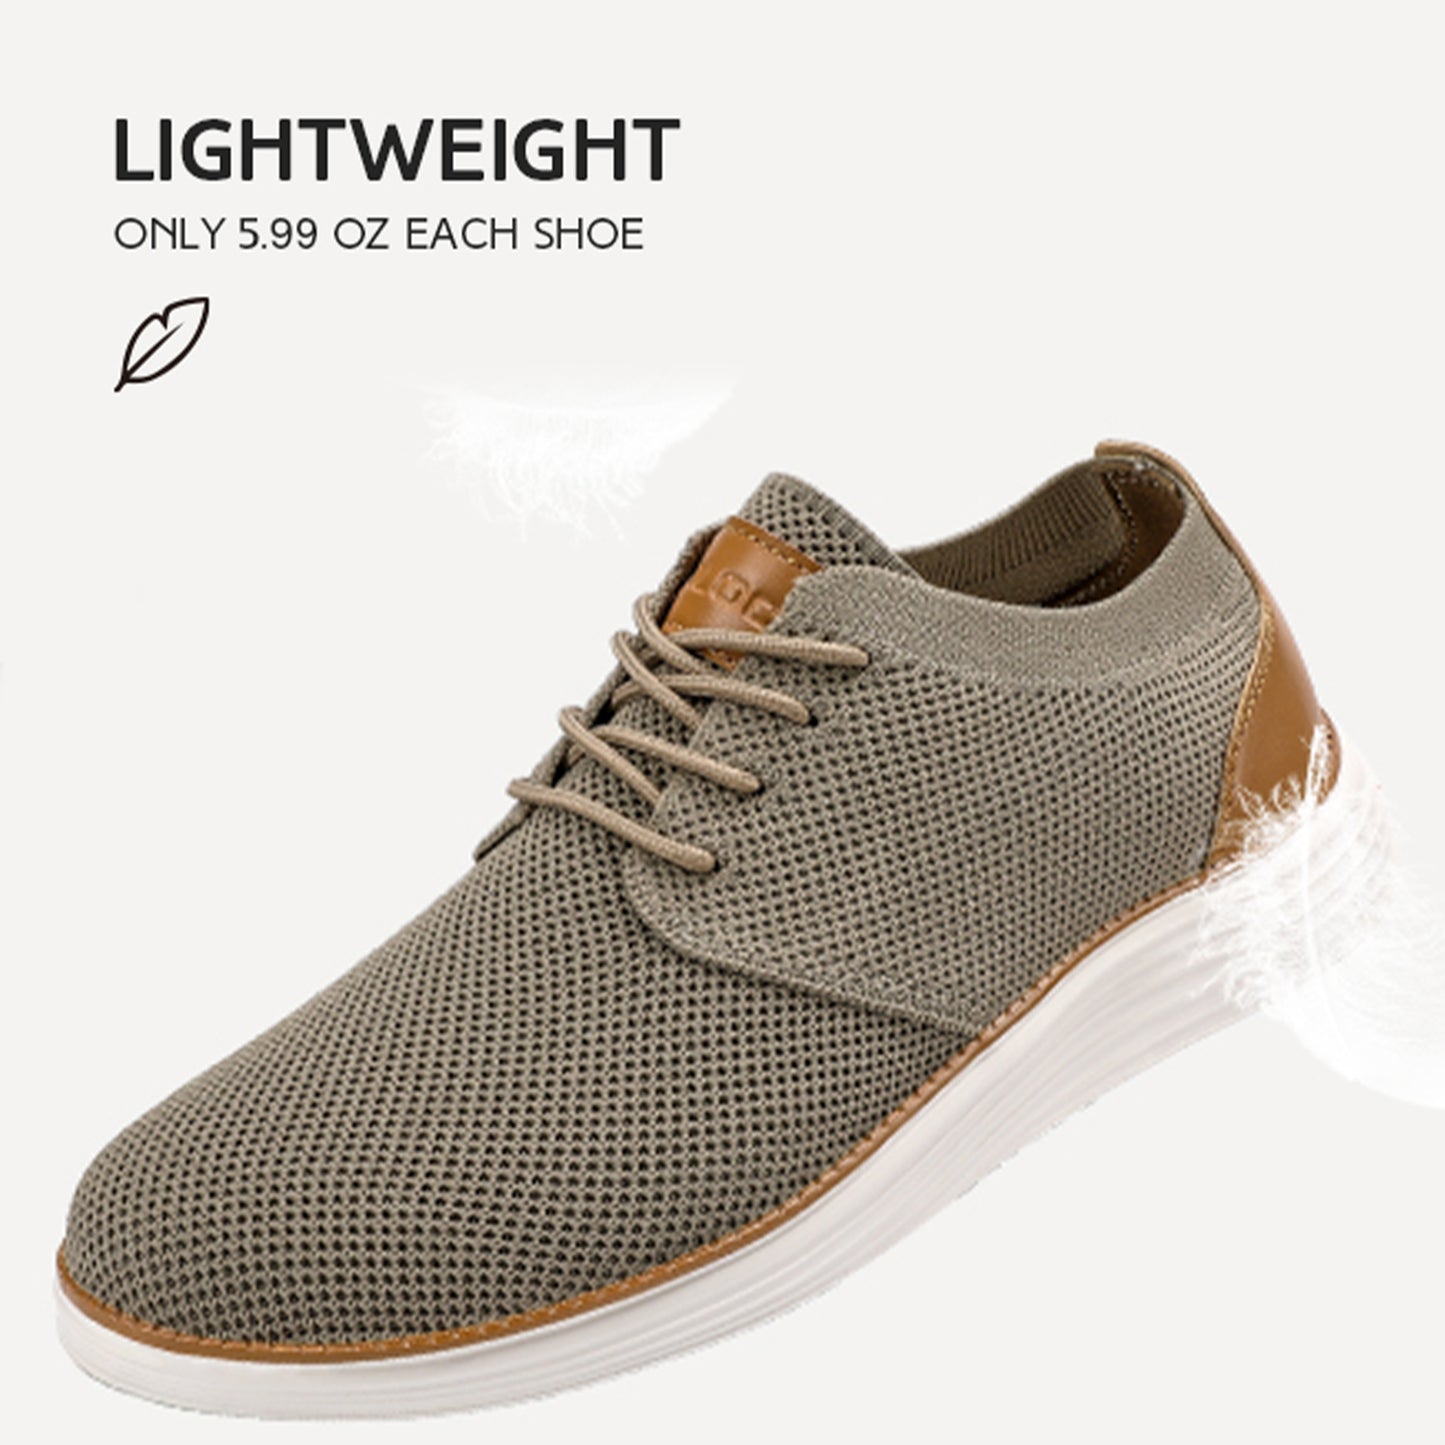 Men's Lace Up elastic collar Fashion Dress Sneakers  Business Oxfords Comfortable Breathable Lightweight Casual Walking Shoes